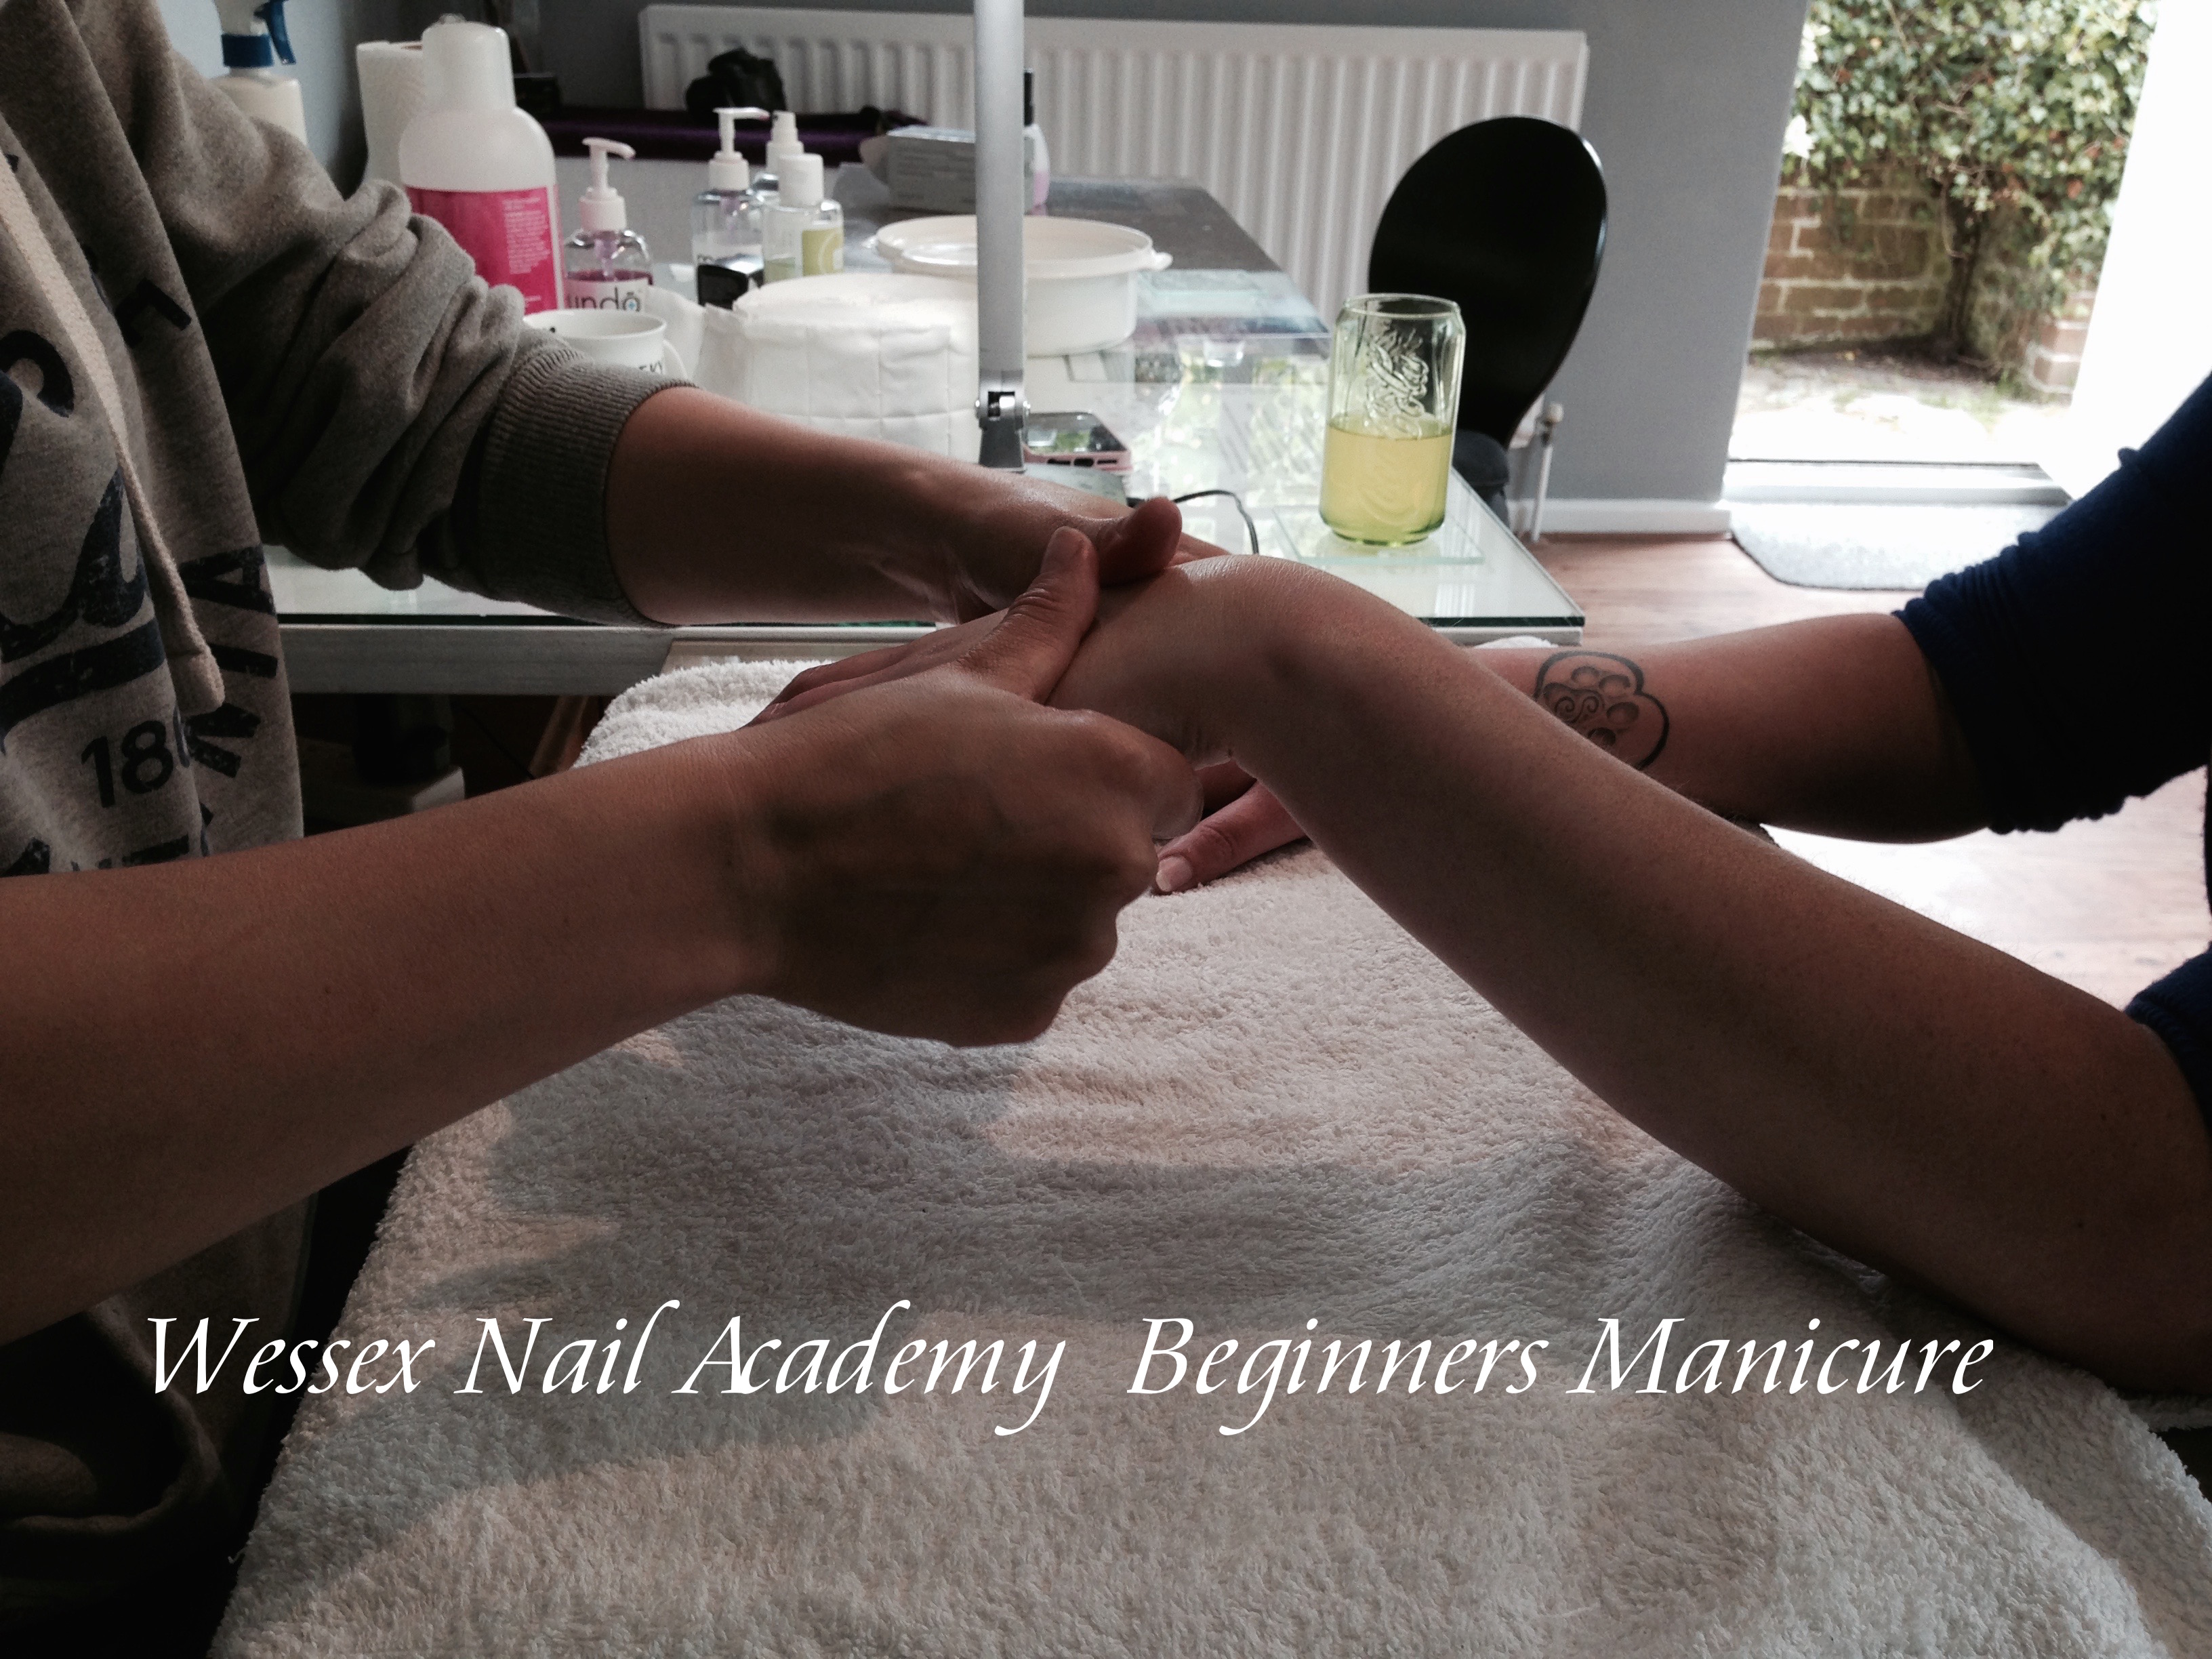 Beginners Manicure Training Course, Nail extension training, nail training course, Wessex Nail Academy Okeford Fitzpaine, Dorset